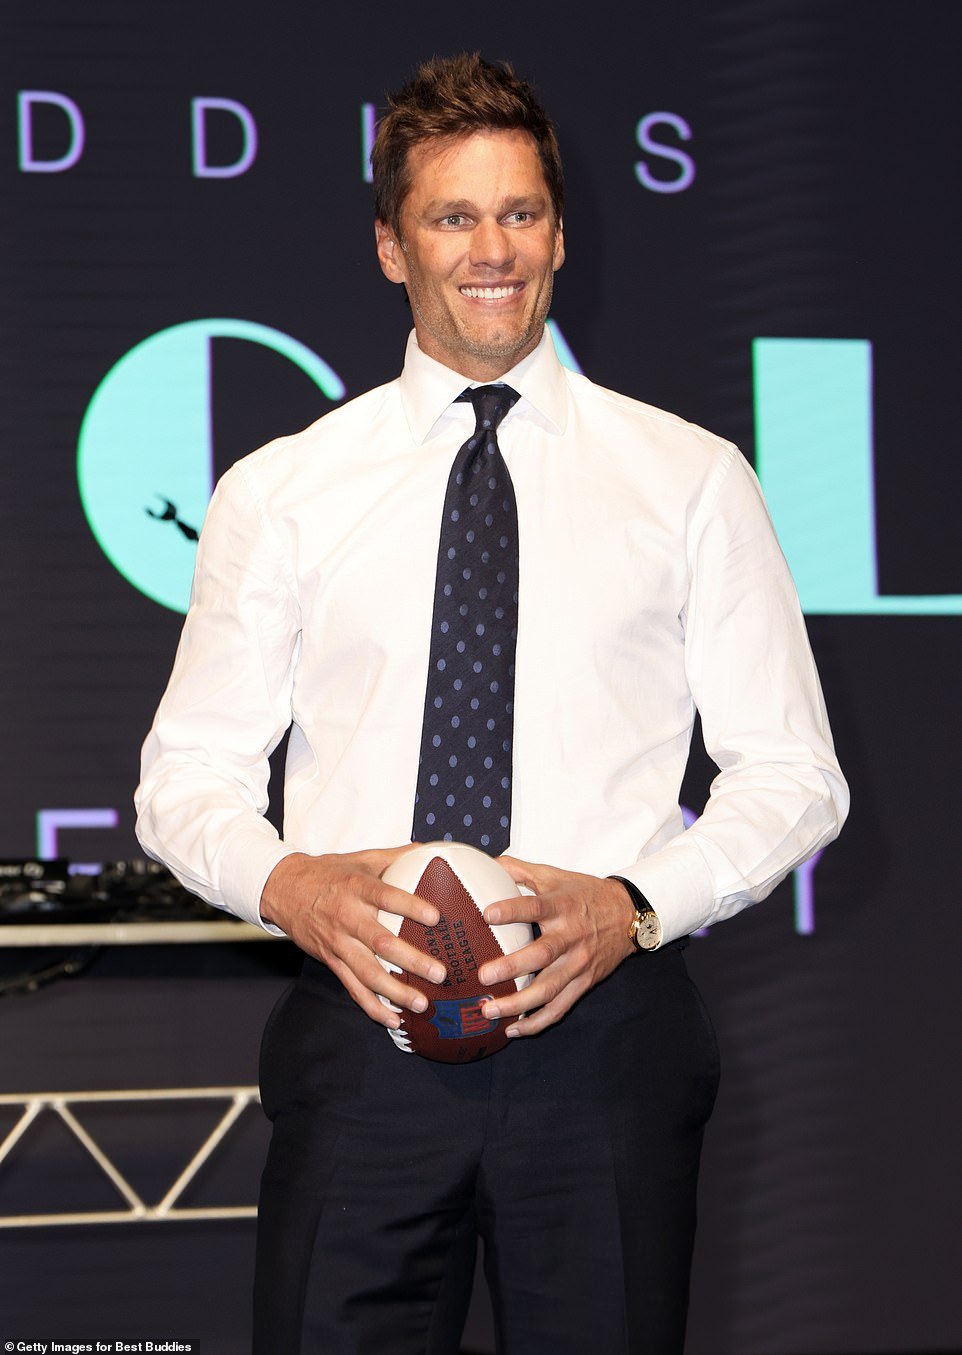 However, Brady's upcoming addition to Fox's broadcast lineup has raised the question of what will happen to Olsen, who has become a fan favorite during his three years as the company's lead broadcaster.